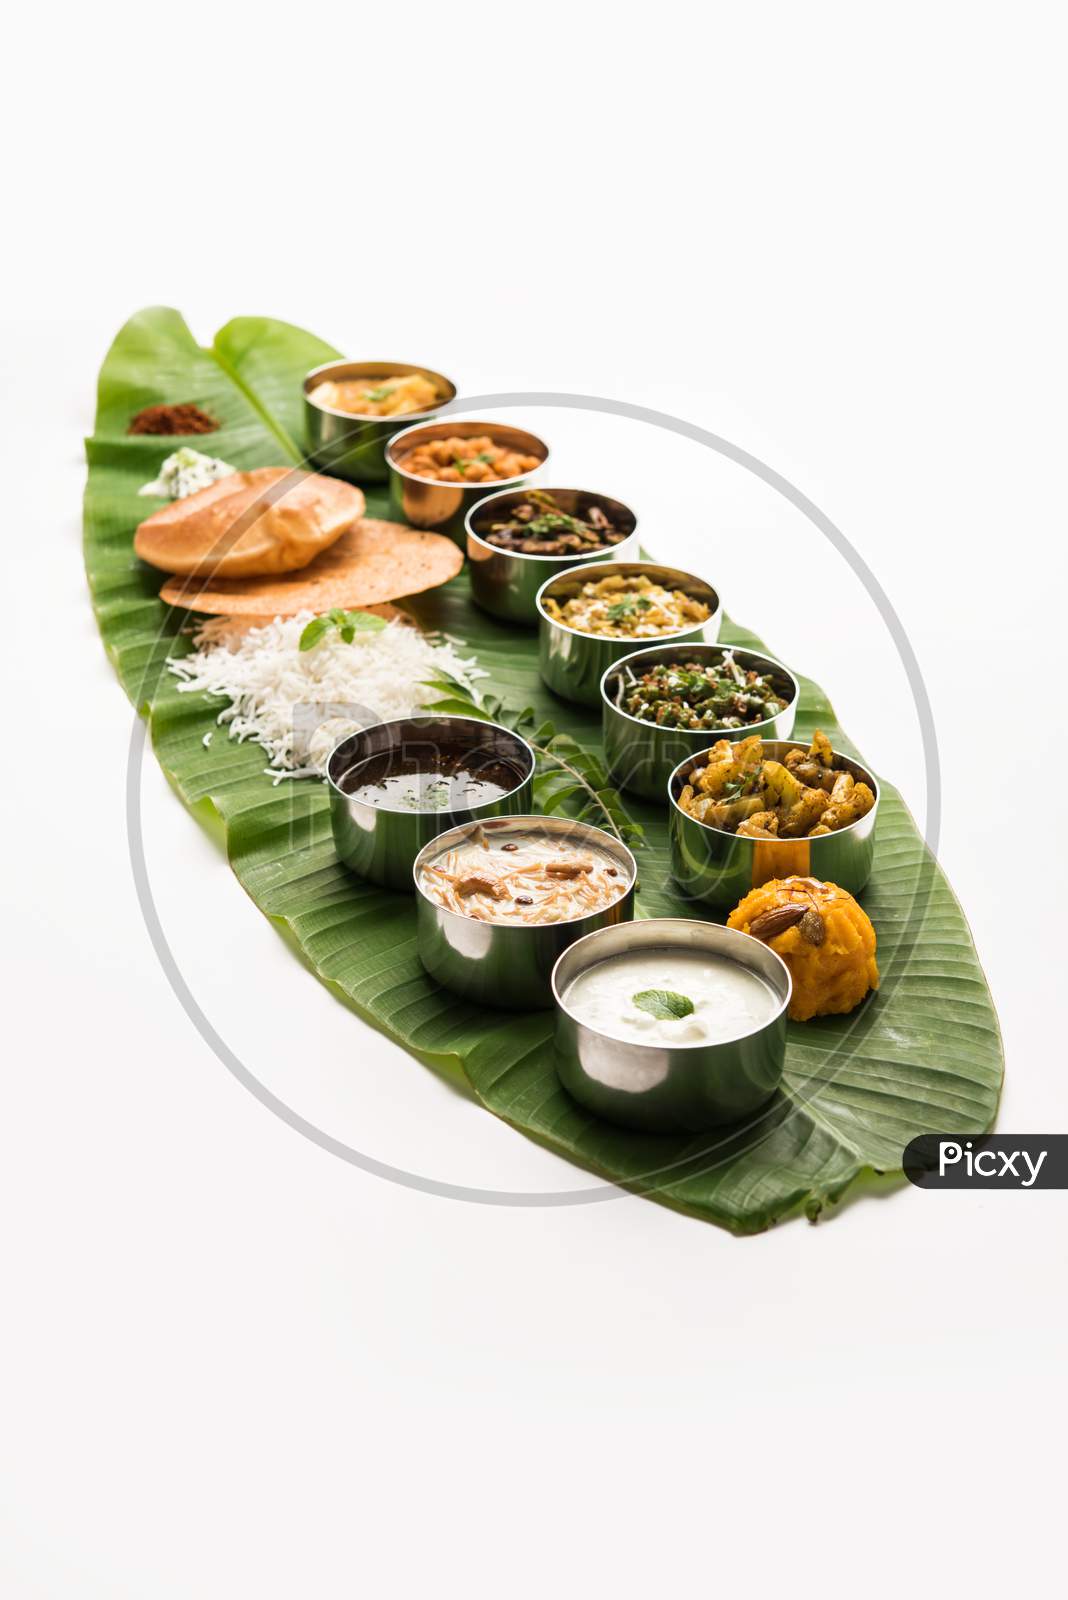 South Indian Style Lunch Or Dinner Meal Or Food Served With A Selection Of Recipes Over Banana Leaf